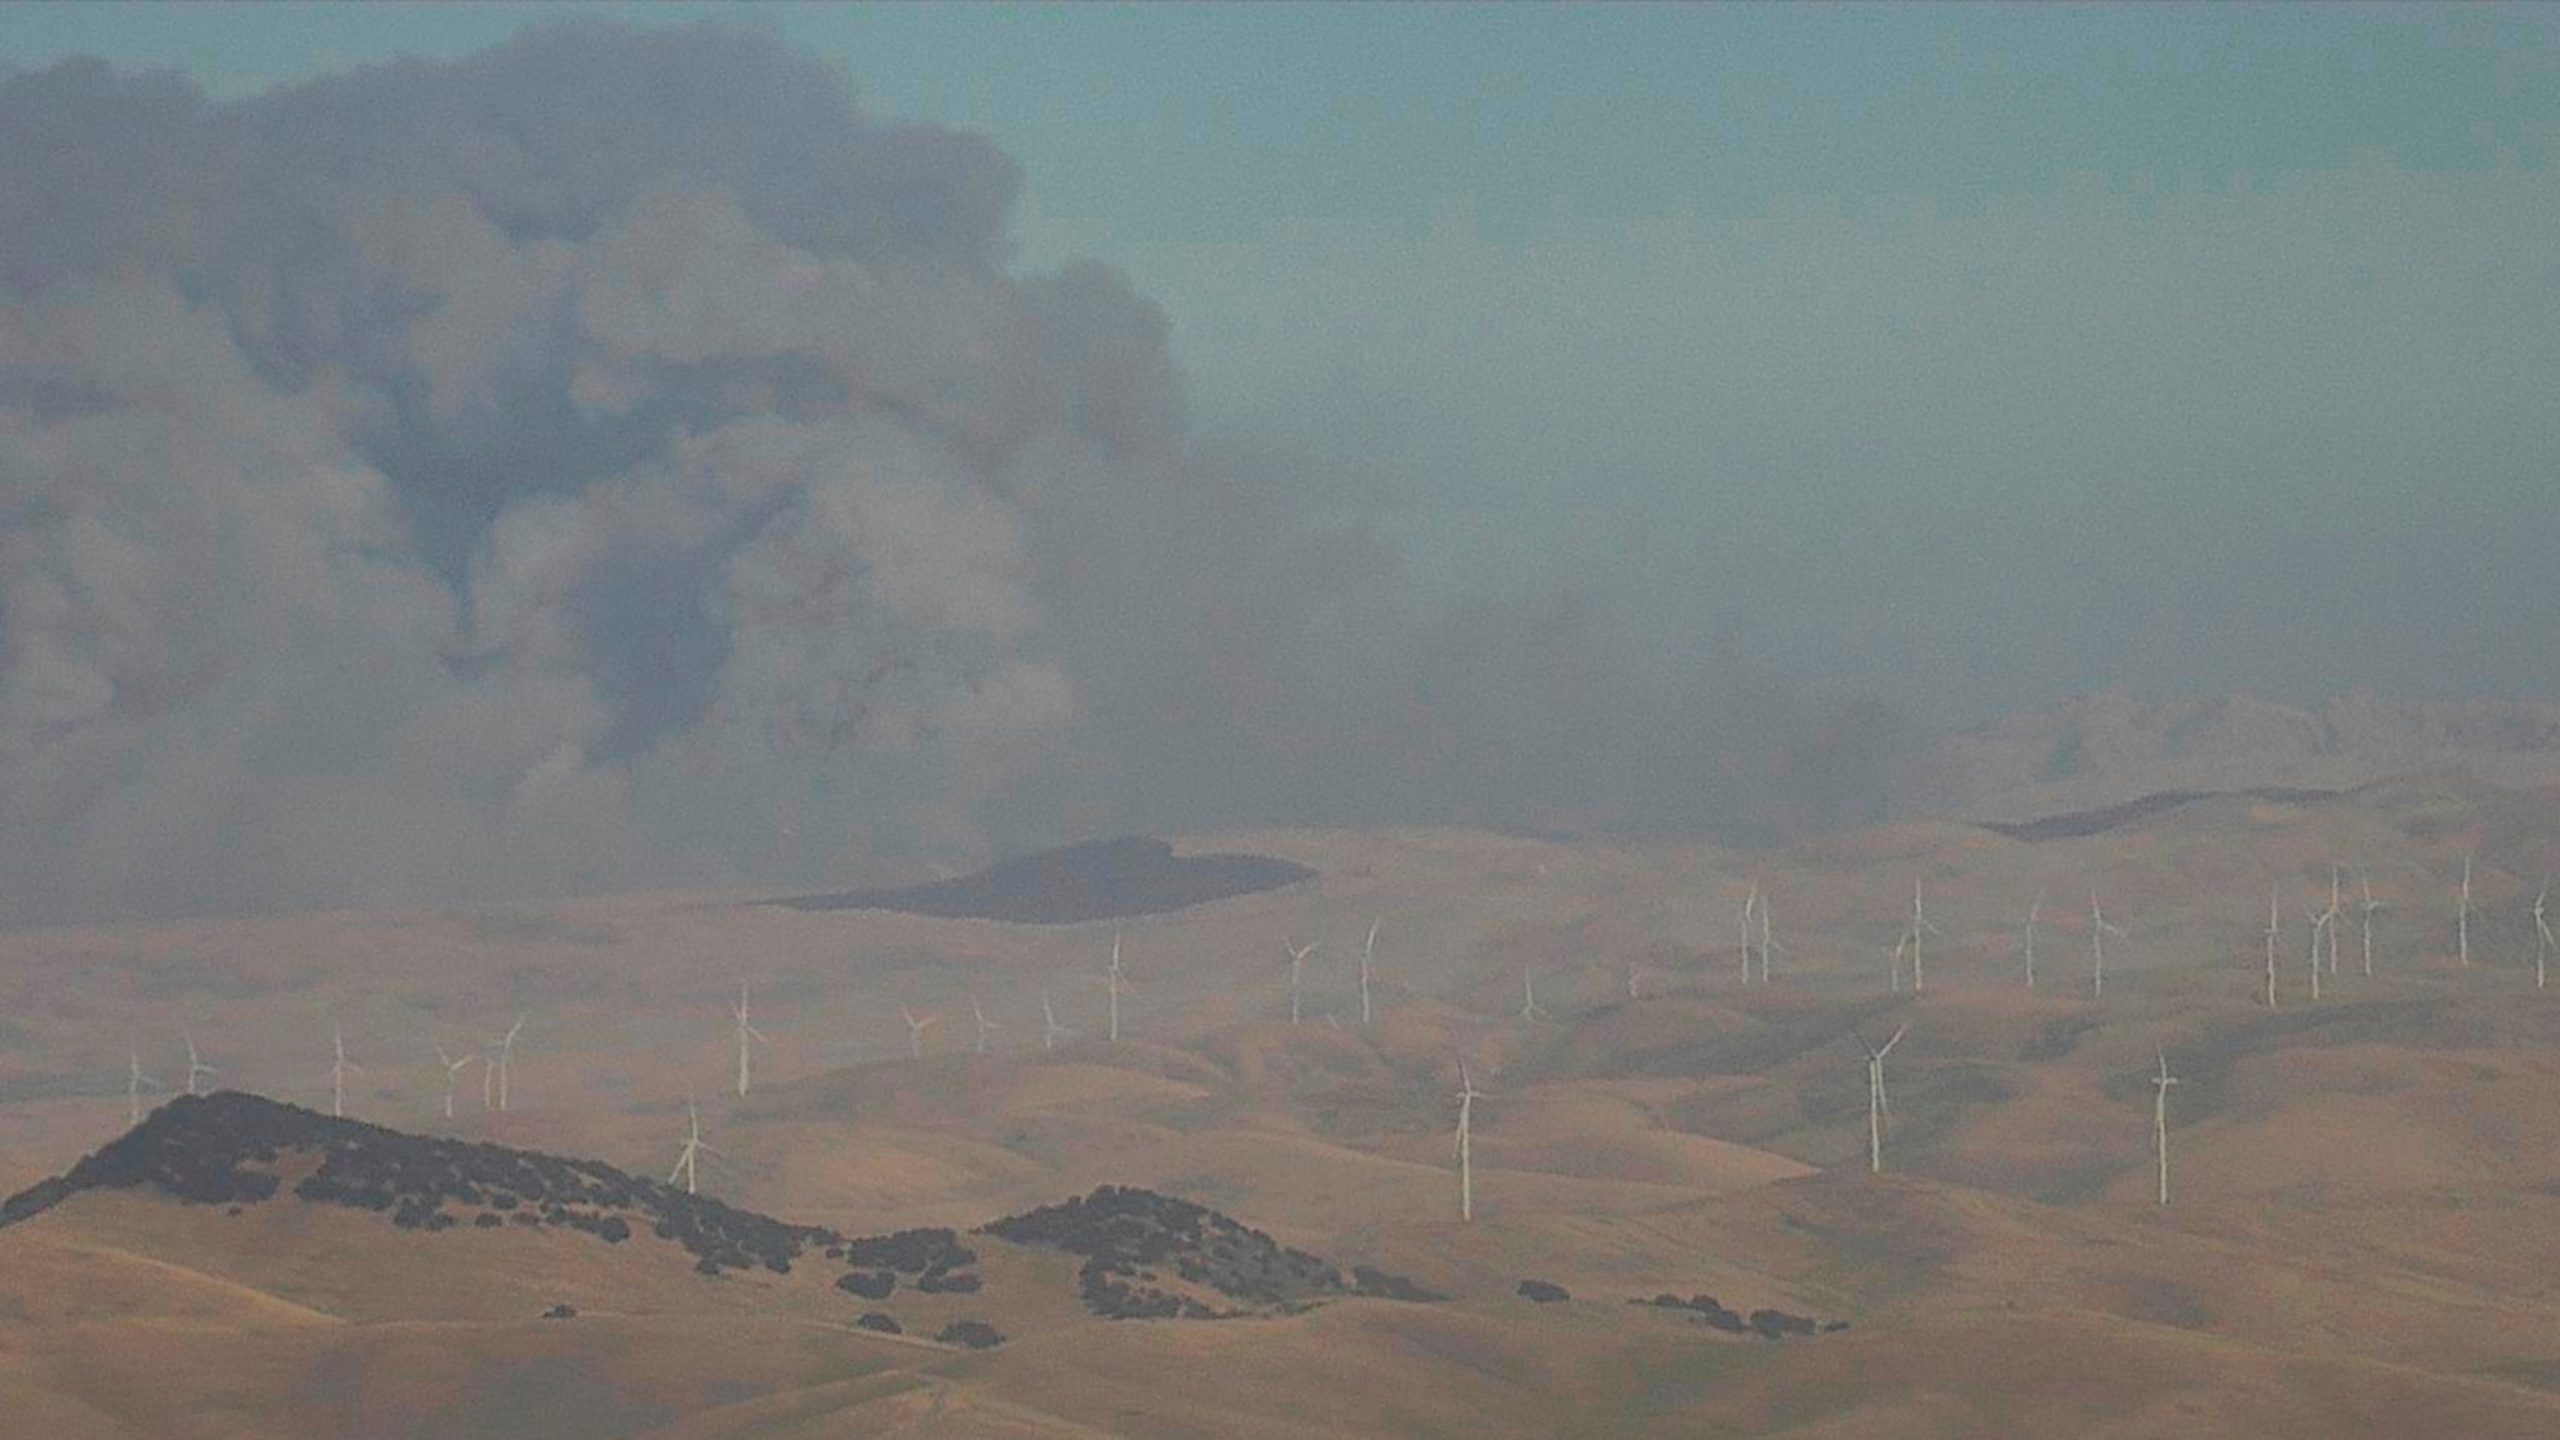 Wildfire near San Francisco grows to 11,000 acres, injuring 2 firefighters